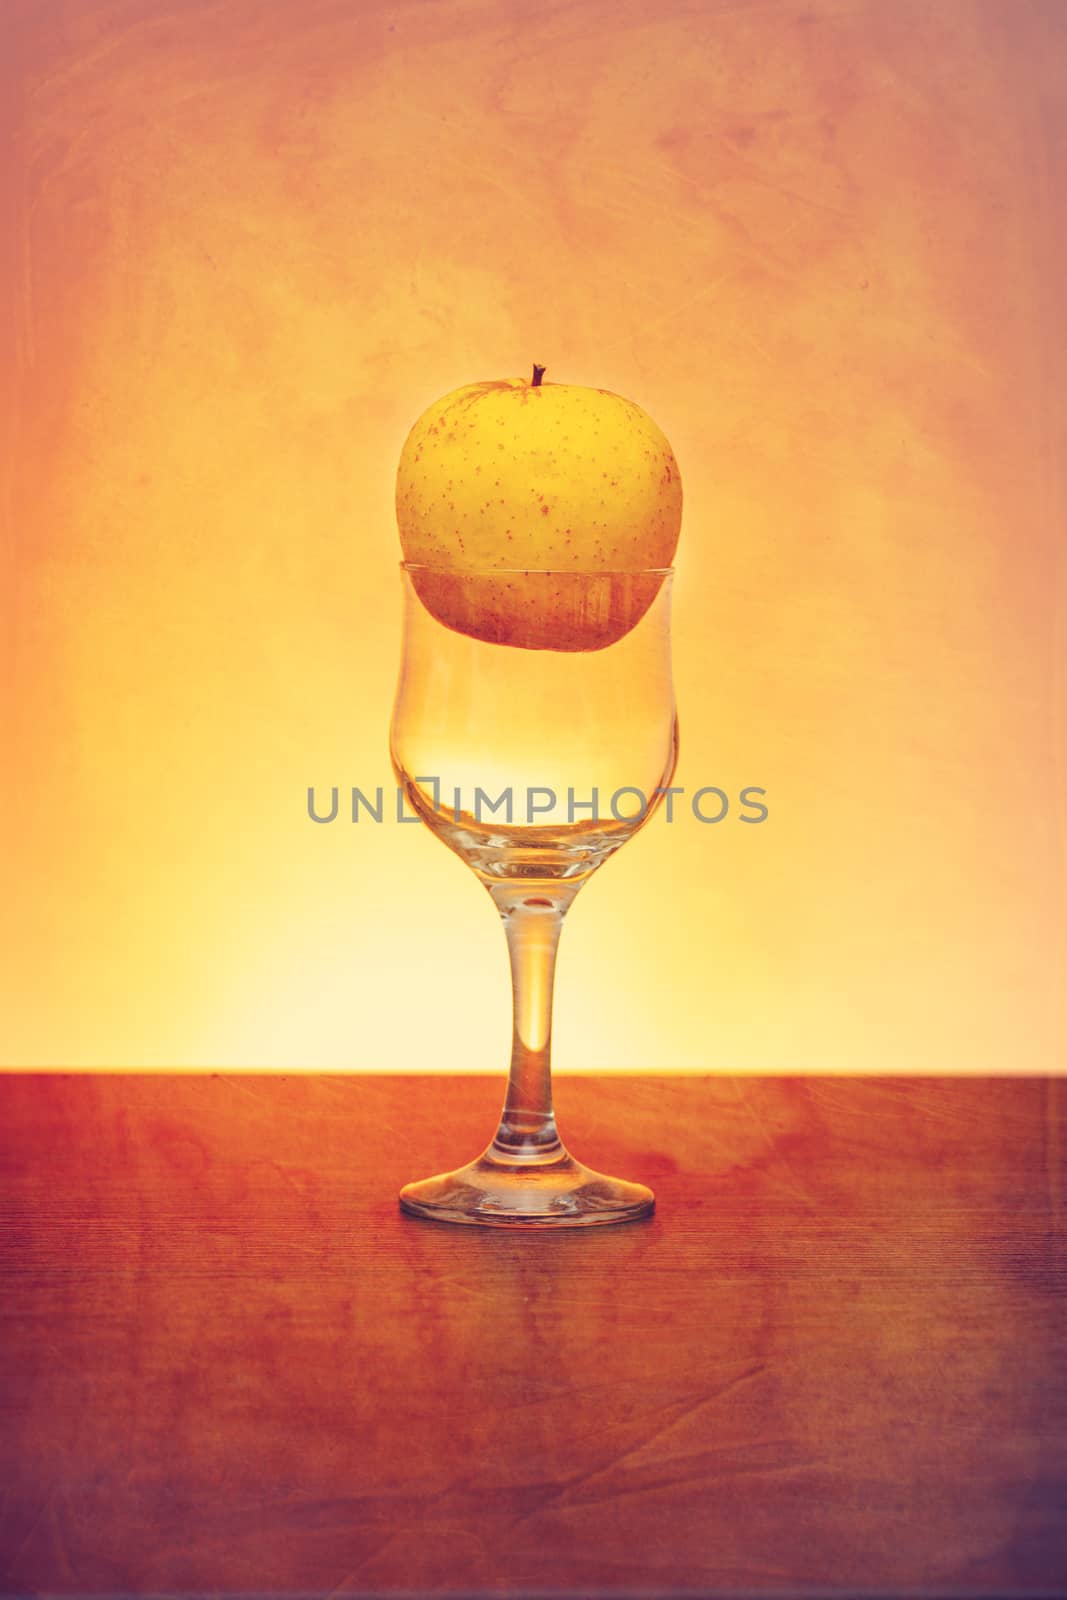 Conceptual idea of golden apple in the cider glass as raw material instead of  final product using retro filter